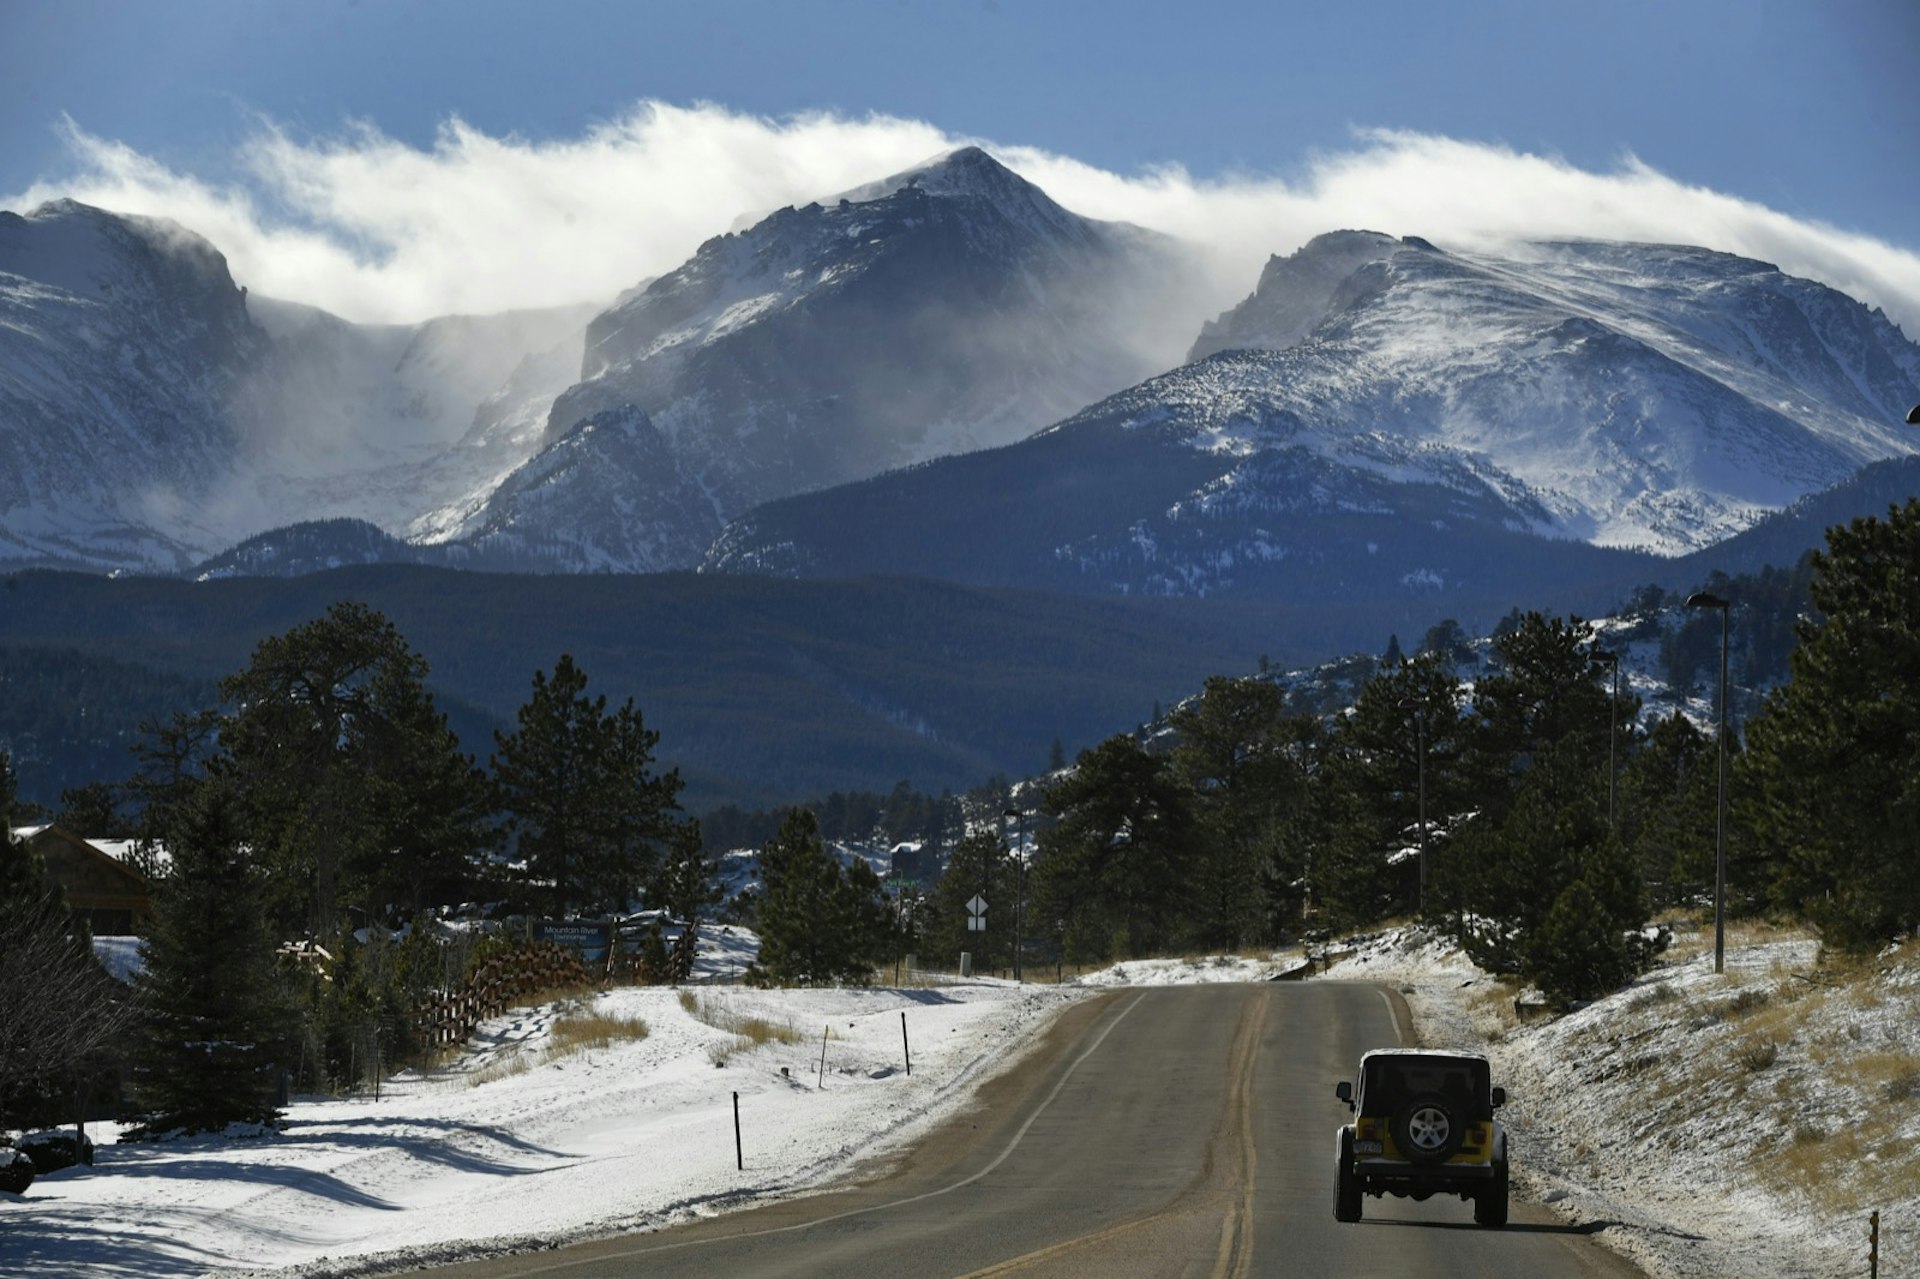 A jeep wrangler drives down a road with snow on both sides, as the rocky mountains loom ahead and snow is blown off the tops of the peaks